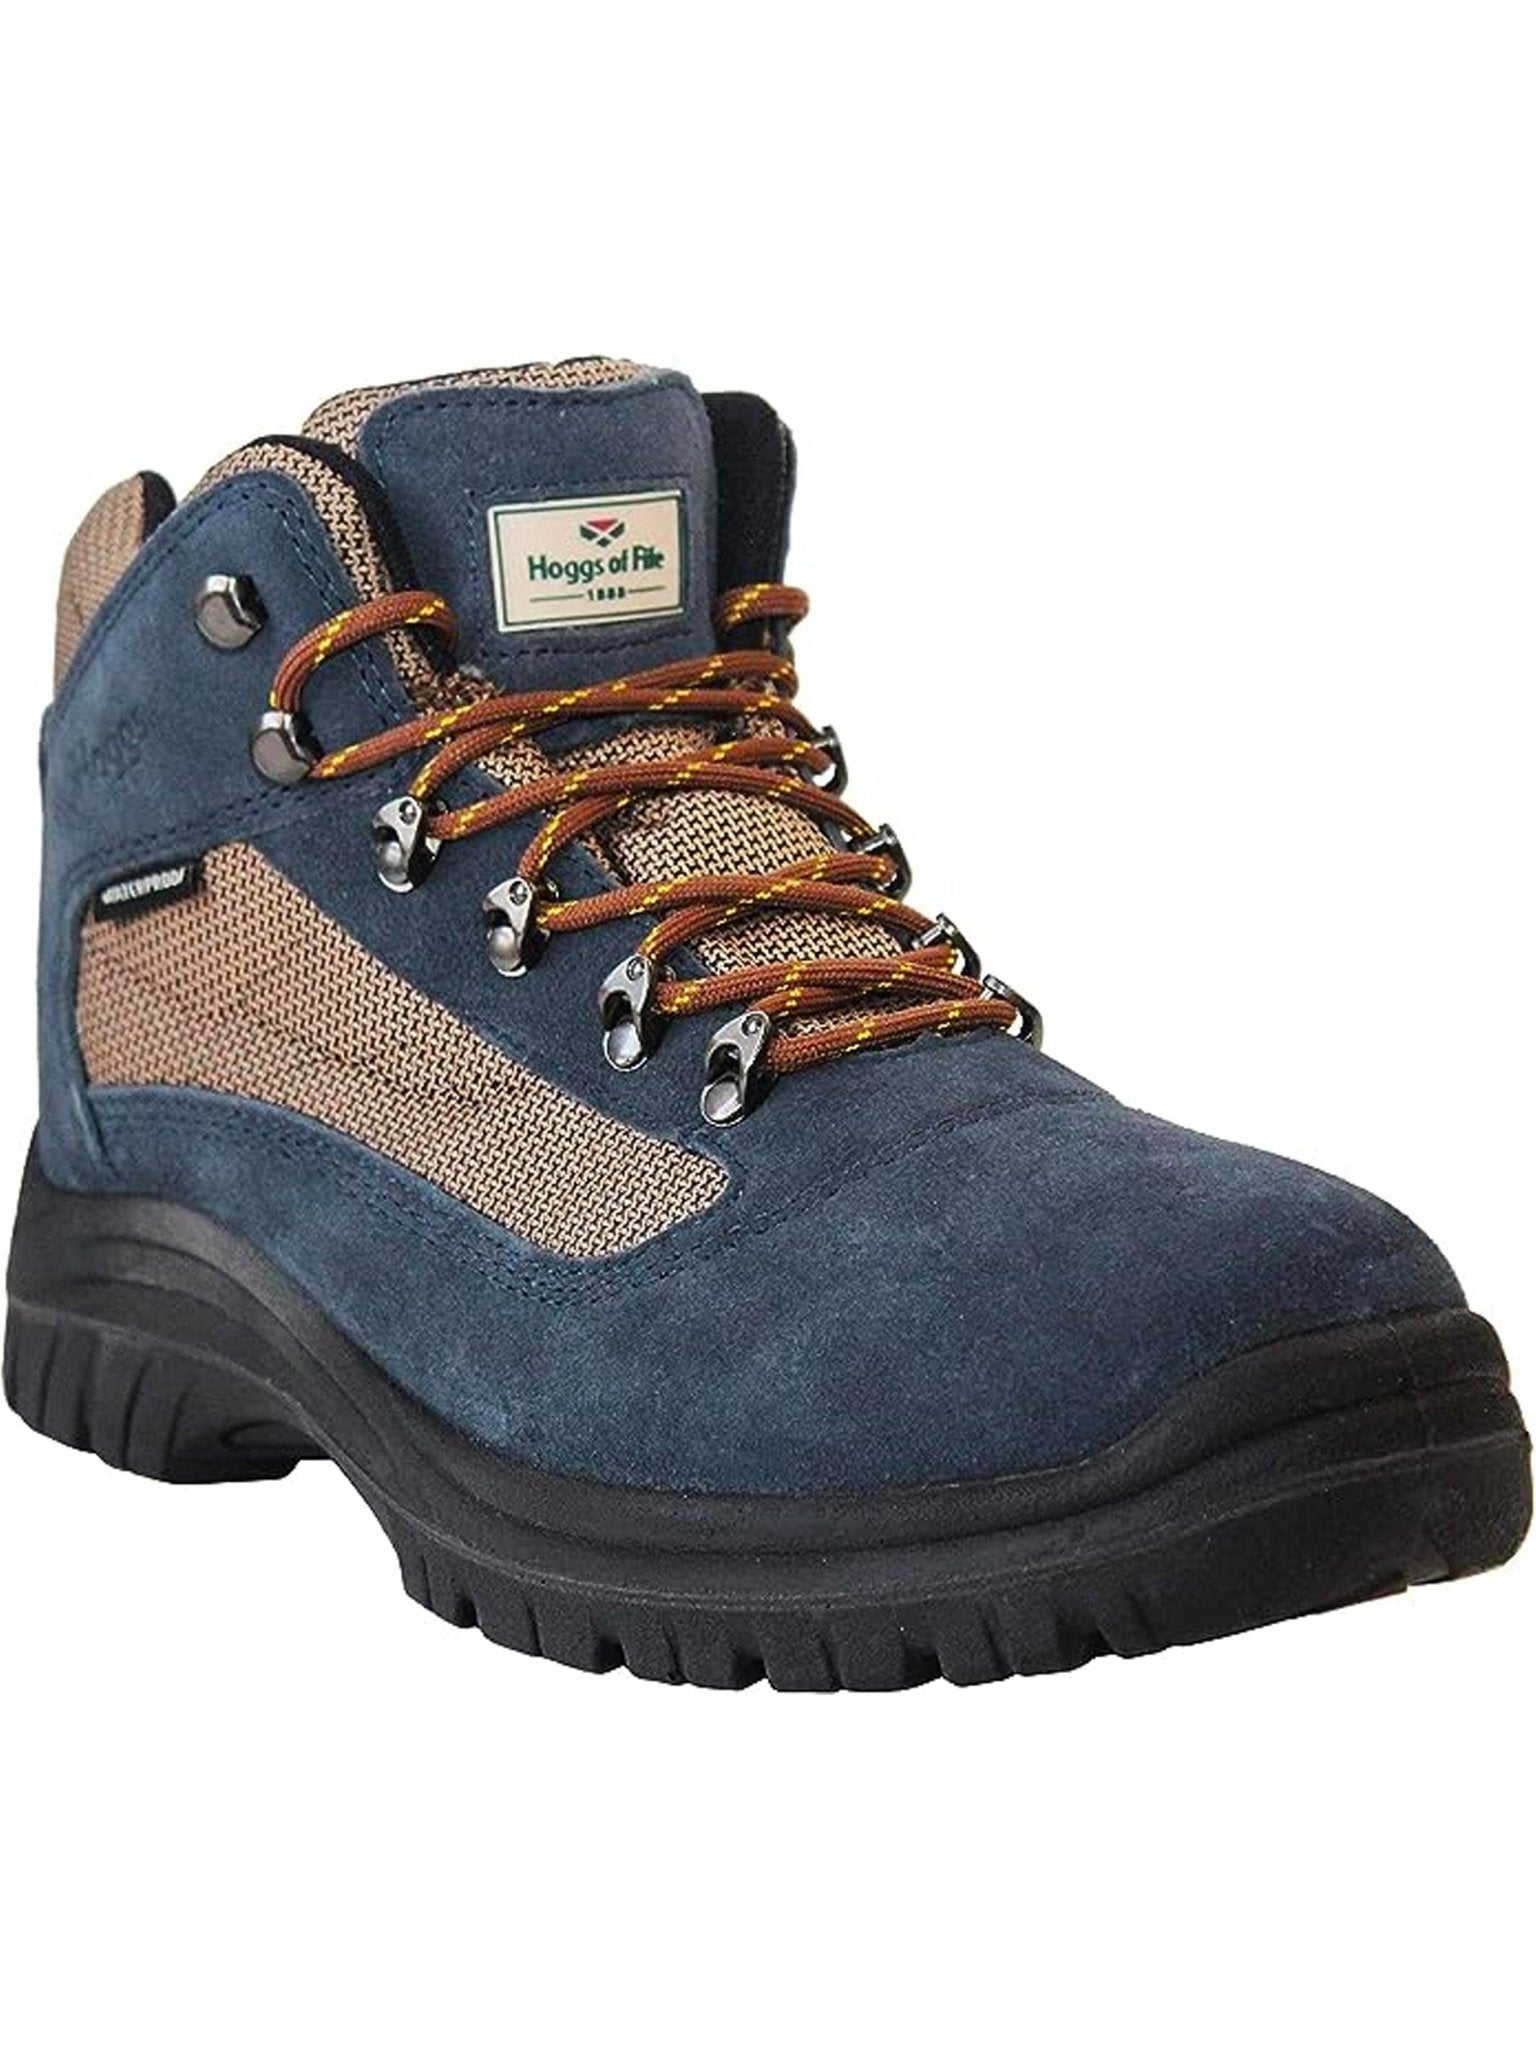 Hoggs of Fife Hoggs of Fife - Rambler Waterproof boots, Hiking boot, Lightweight breathable boots Boots